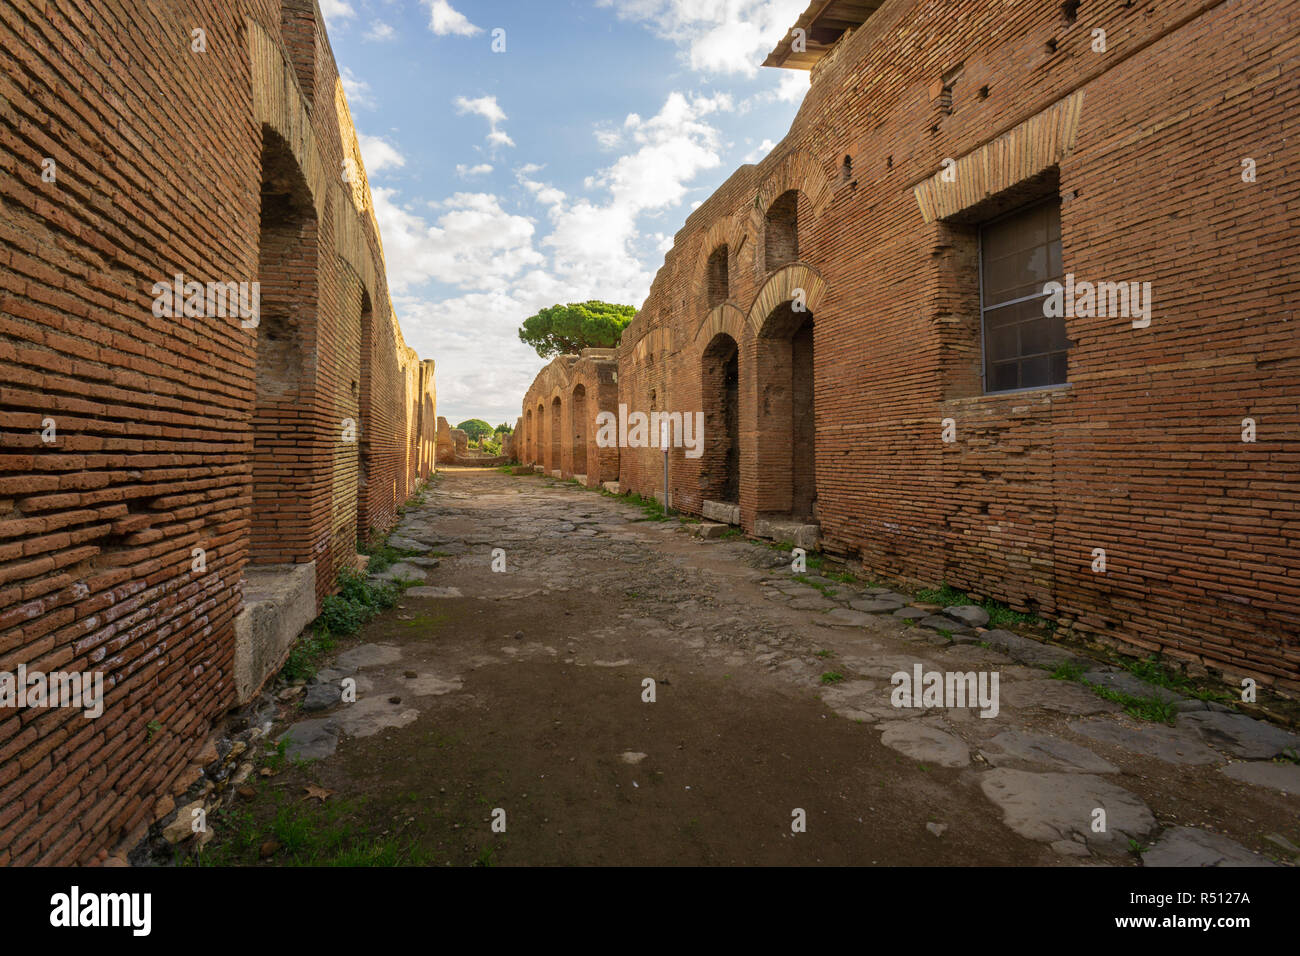 Ostia antica in Rome, Italy. Archaeological Roman empire street view with original ancient Roman buildings Stock Photo